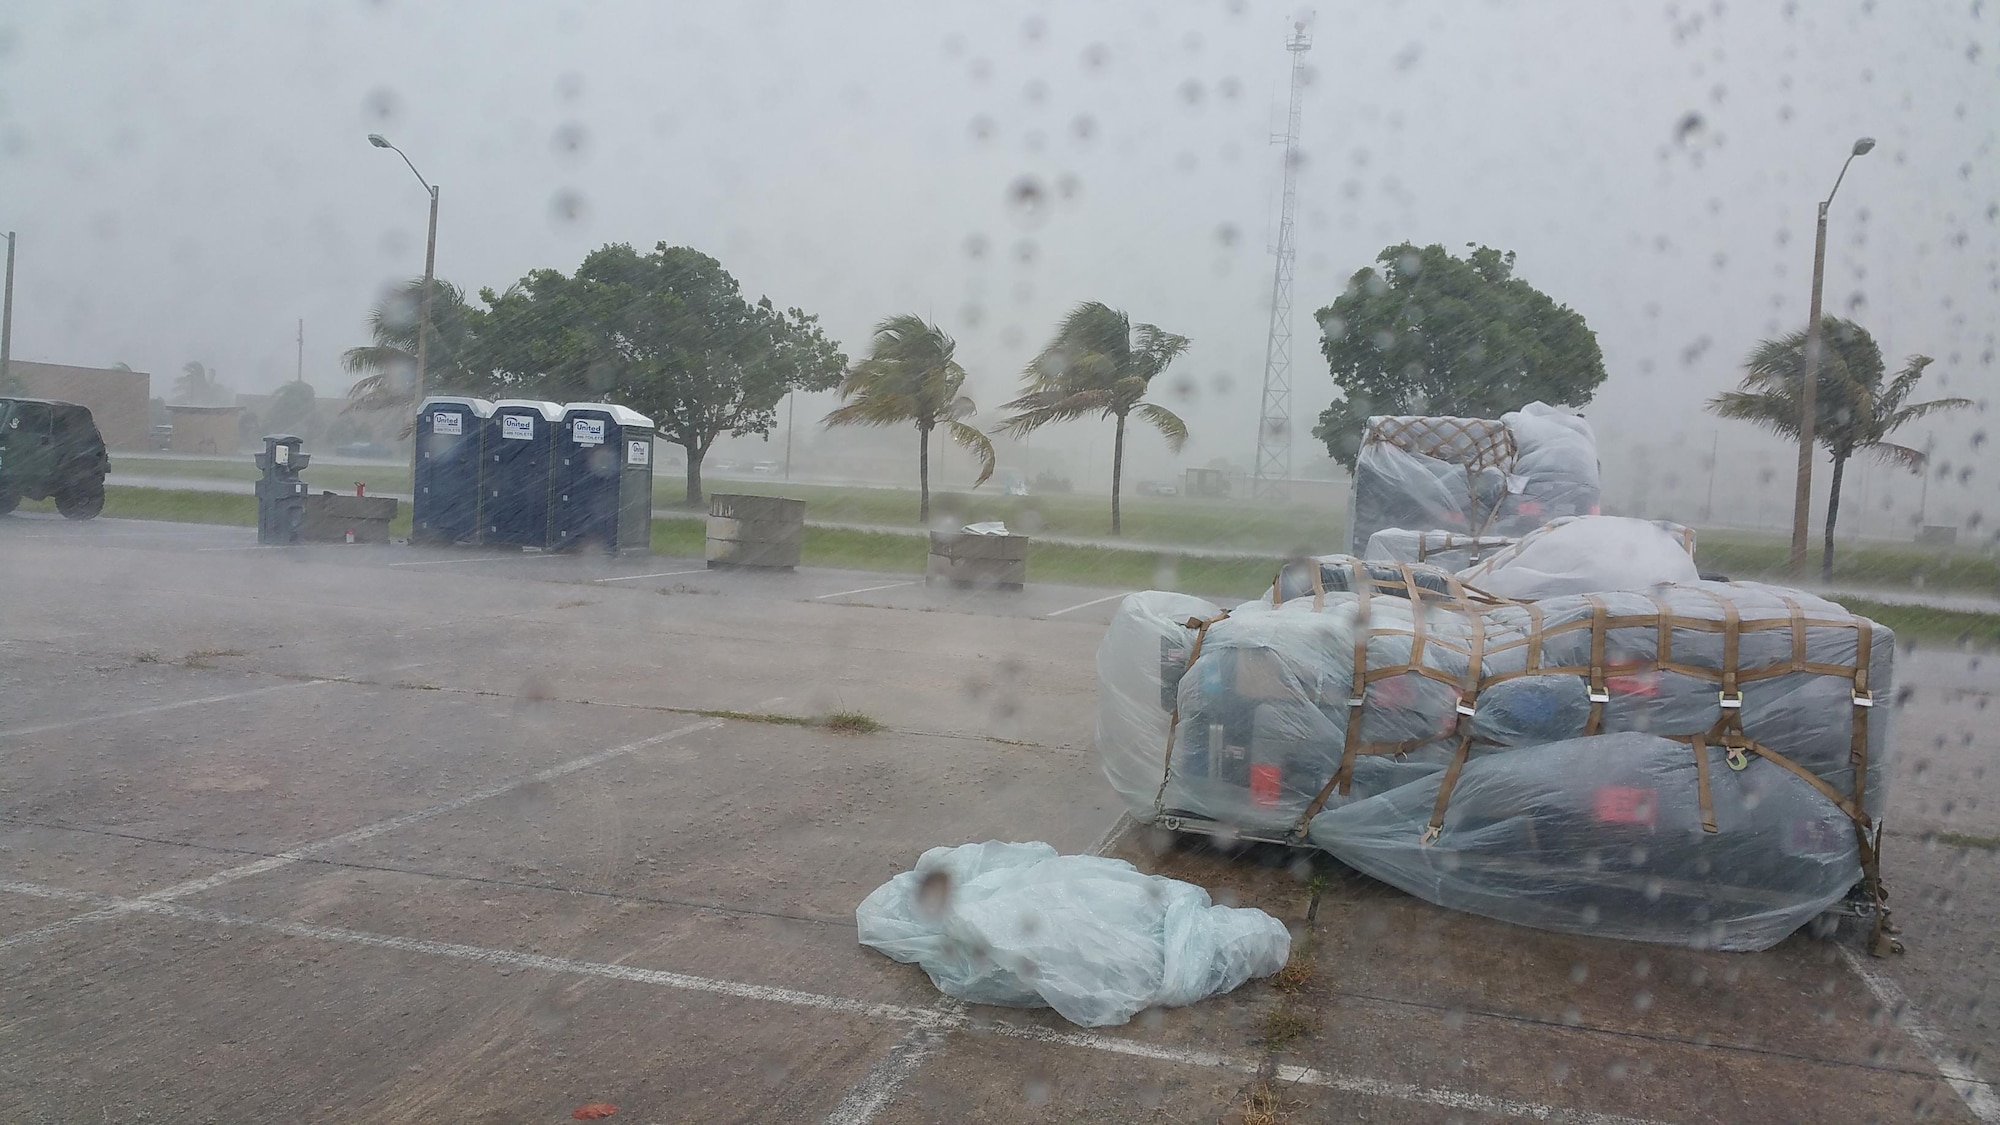 The worksite of the 35th Combat Communications Squadron was pelted by wind and rain during a recent training exercise at Homestead Air Reserve Base, Fla., during south Florida's wettest week in 26 years.